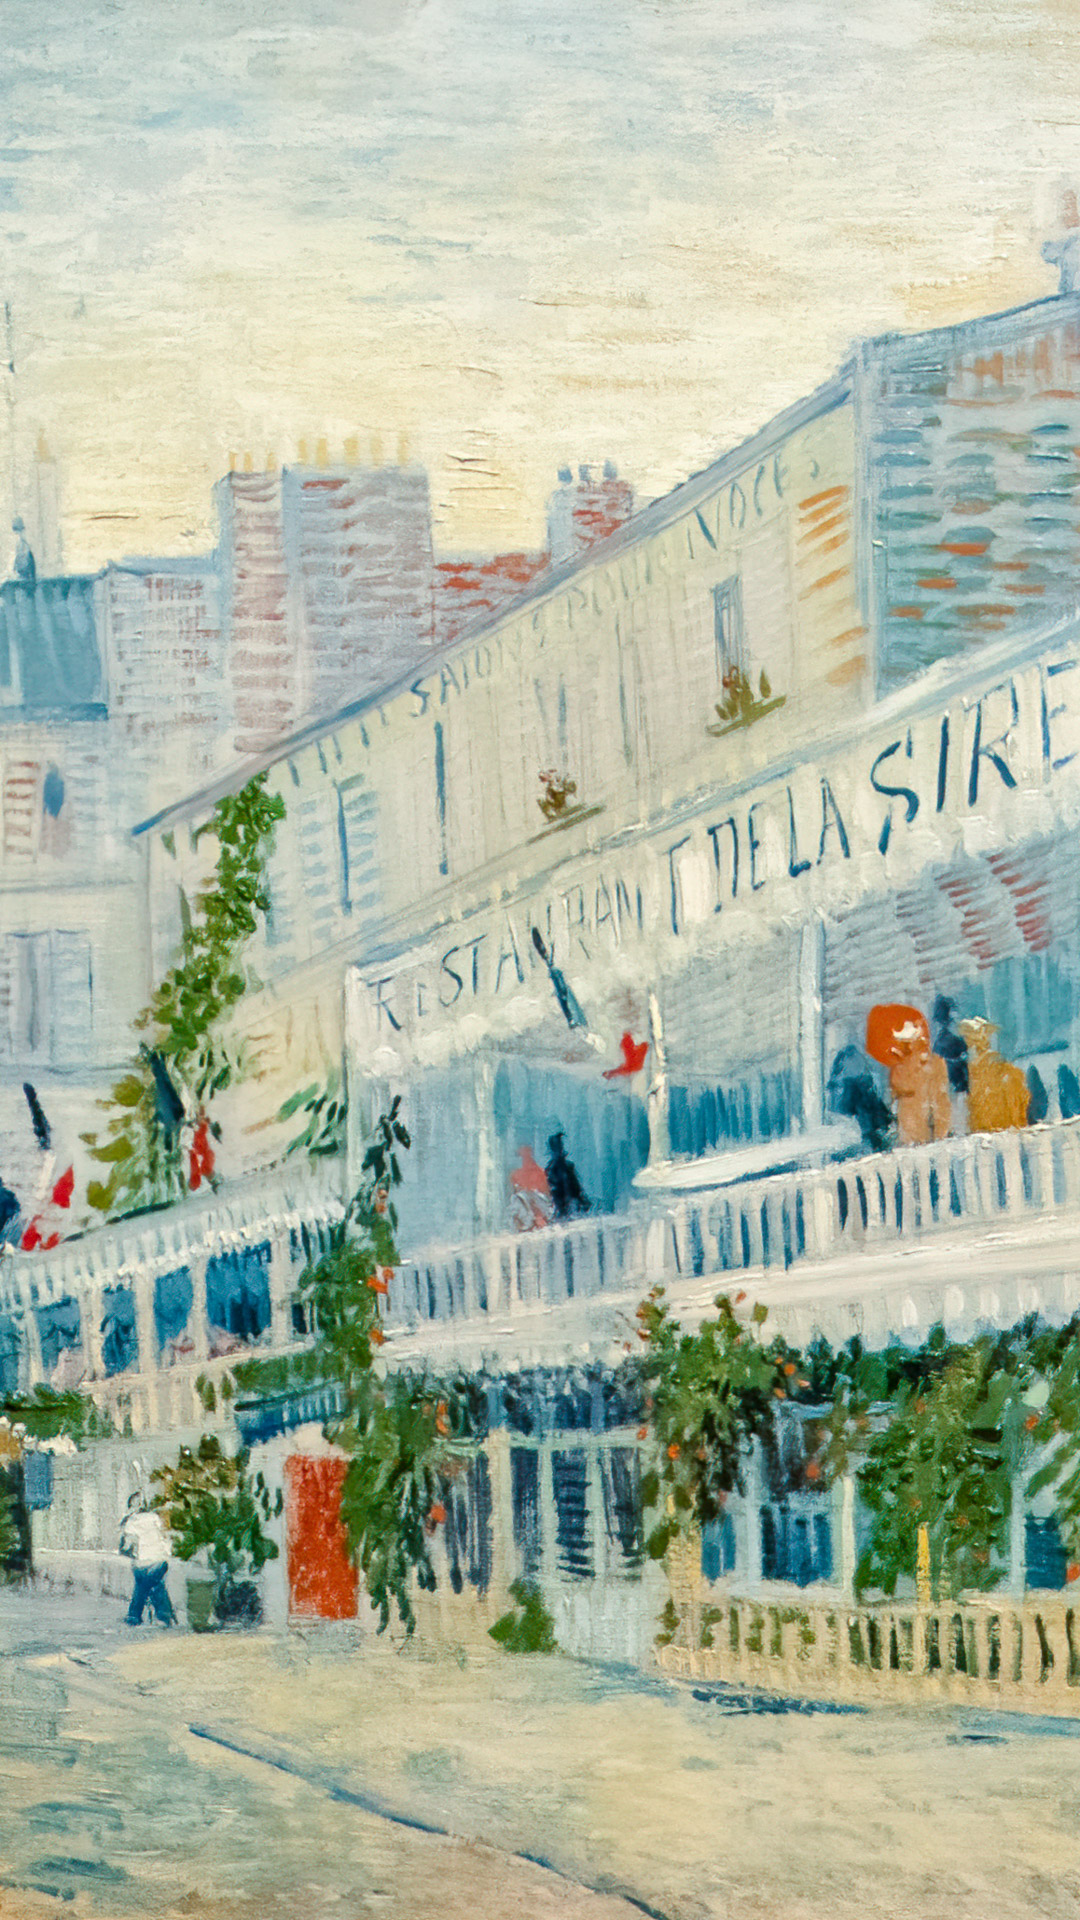 Get lost in the lively and atmospheric scene of ‘Le Restaurant de la Sirène à Asnières’ wallpaper hd, featuring the bustling and colorful restaurant that Van Gogh visited in 1887.